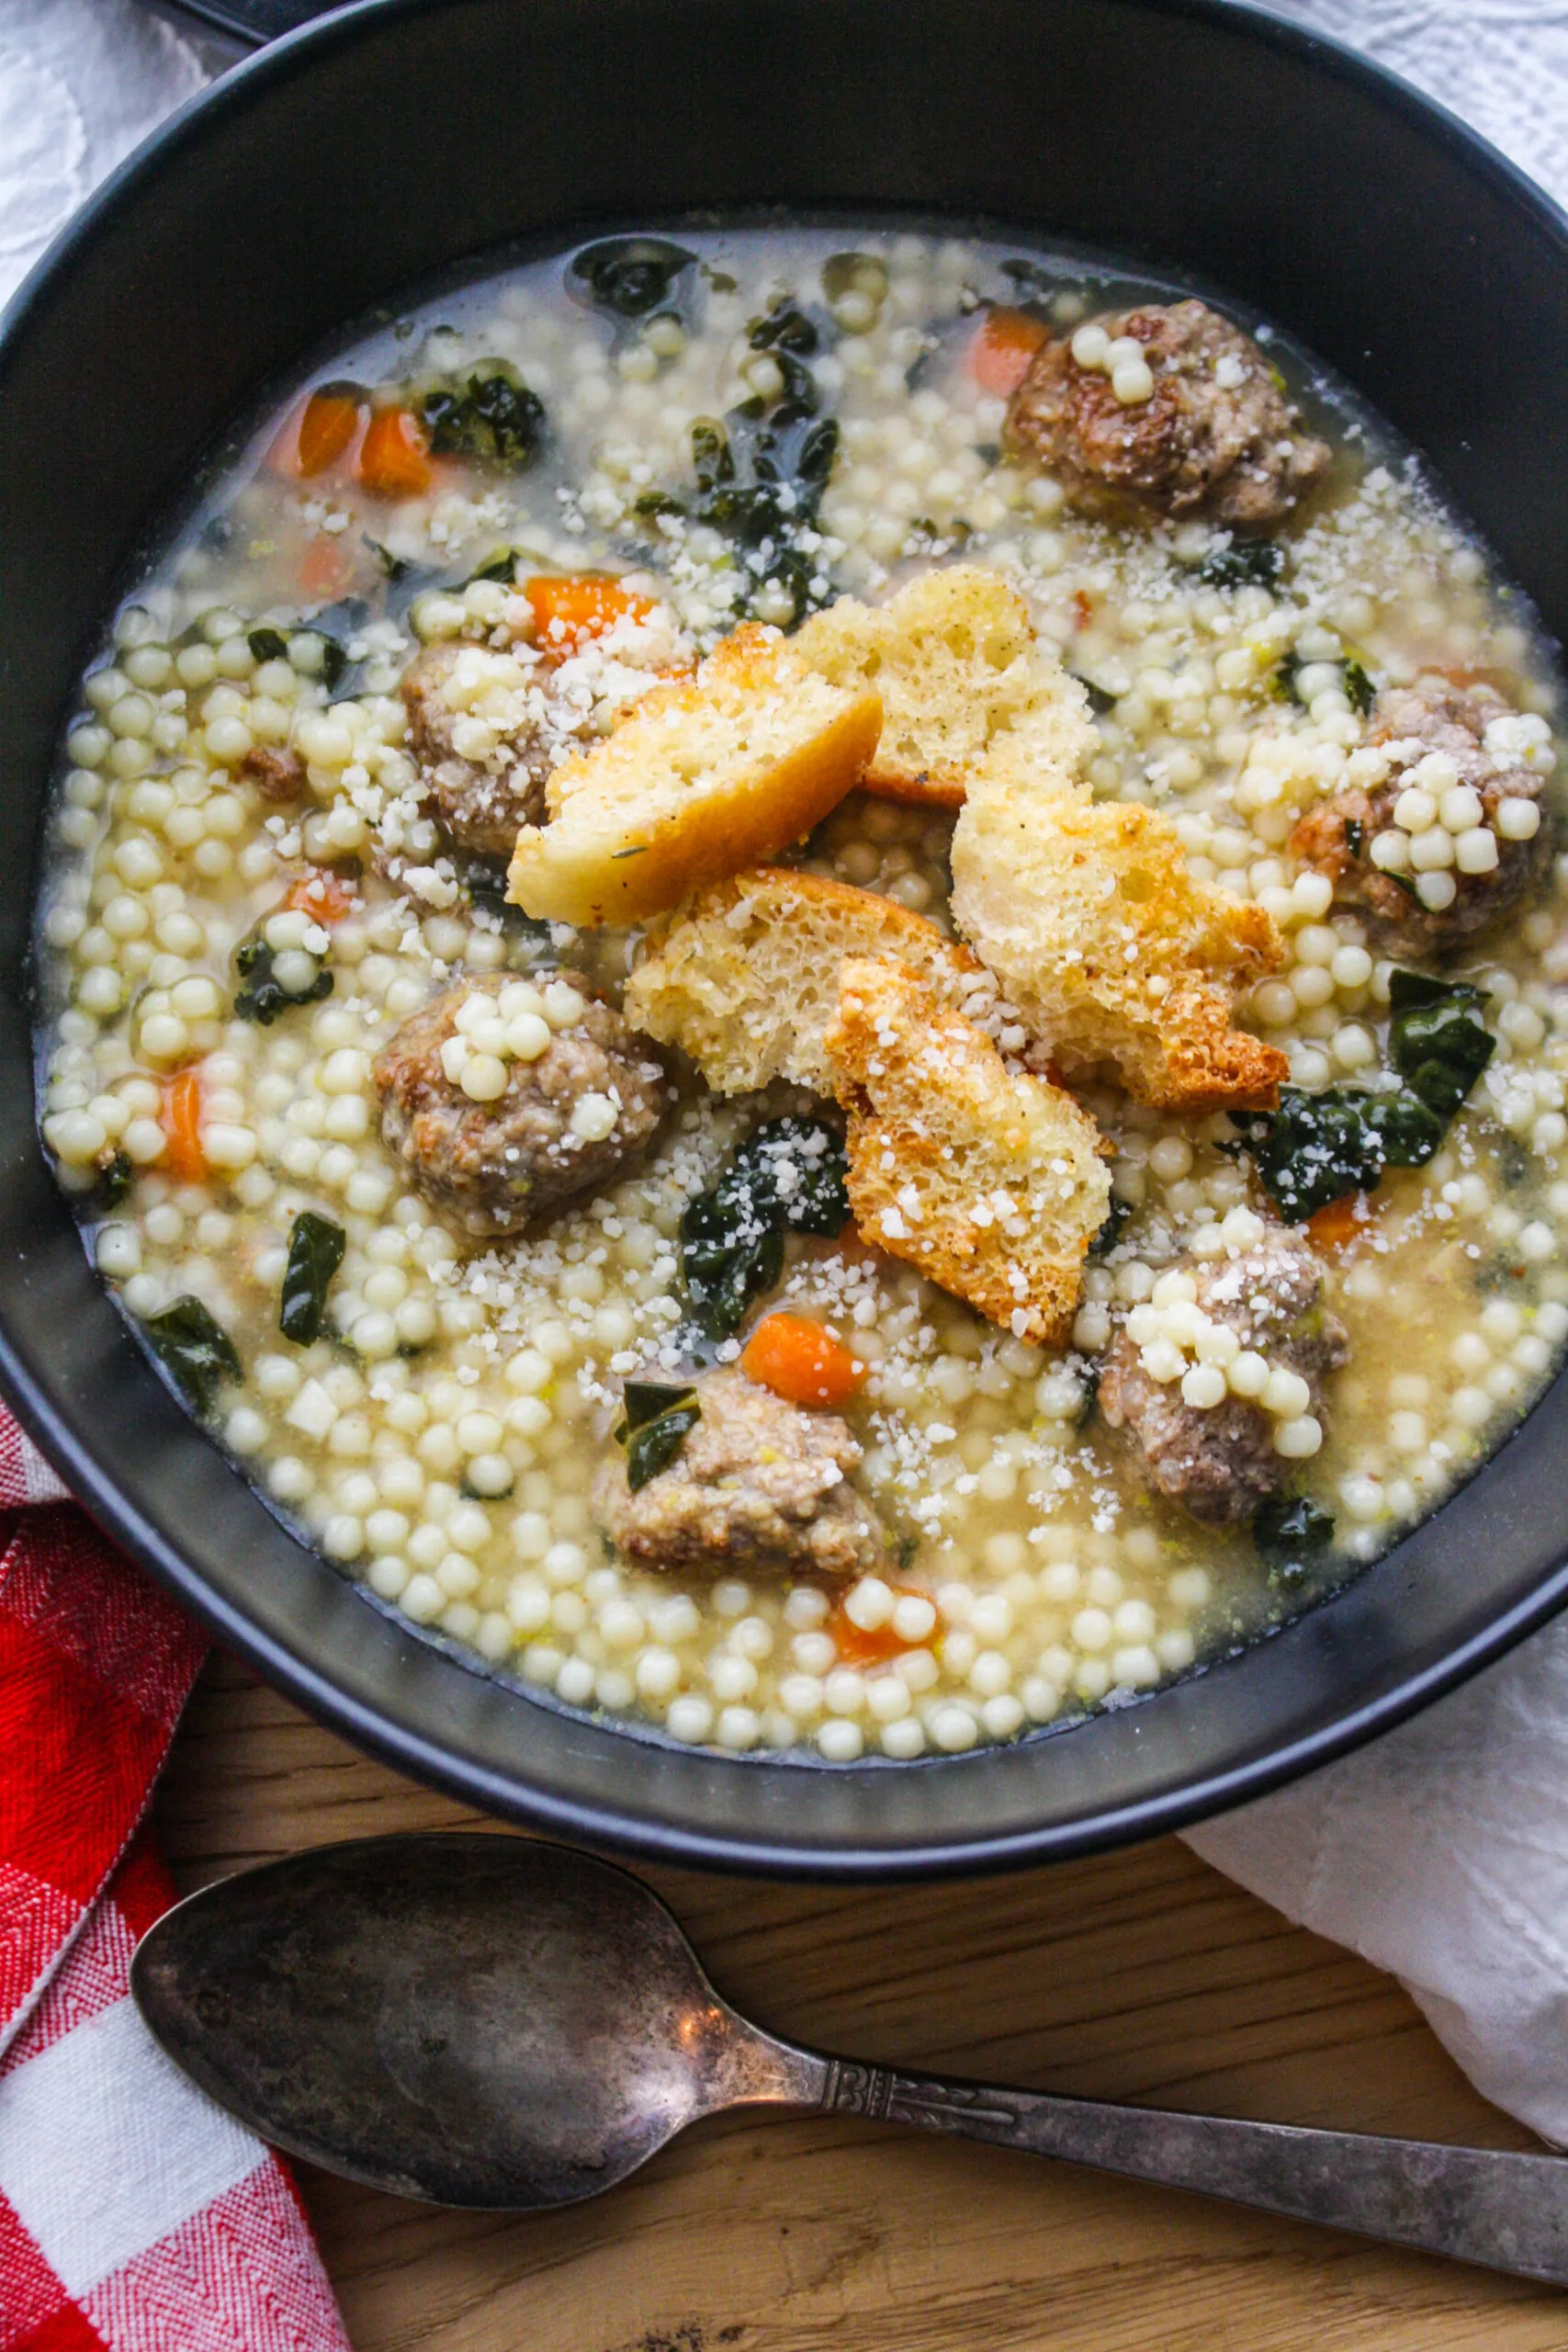 Italian Wedding Soup is filling, flavorful, and comforting. This classic Italian-American dish is a favorite for good reason!